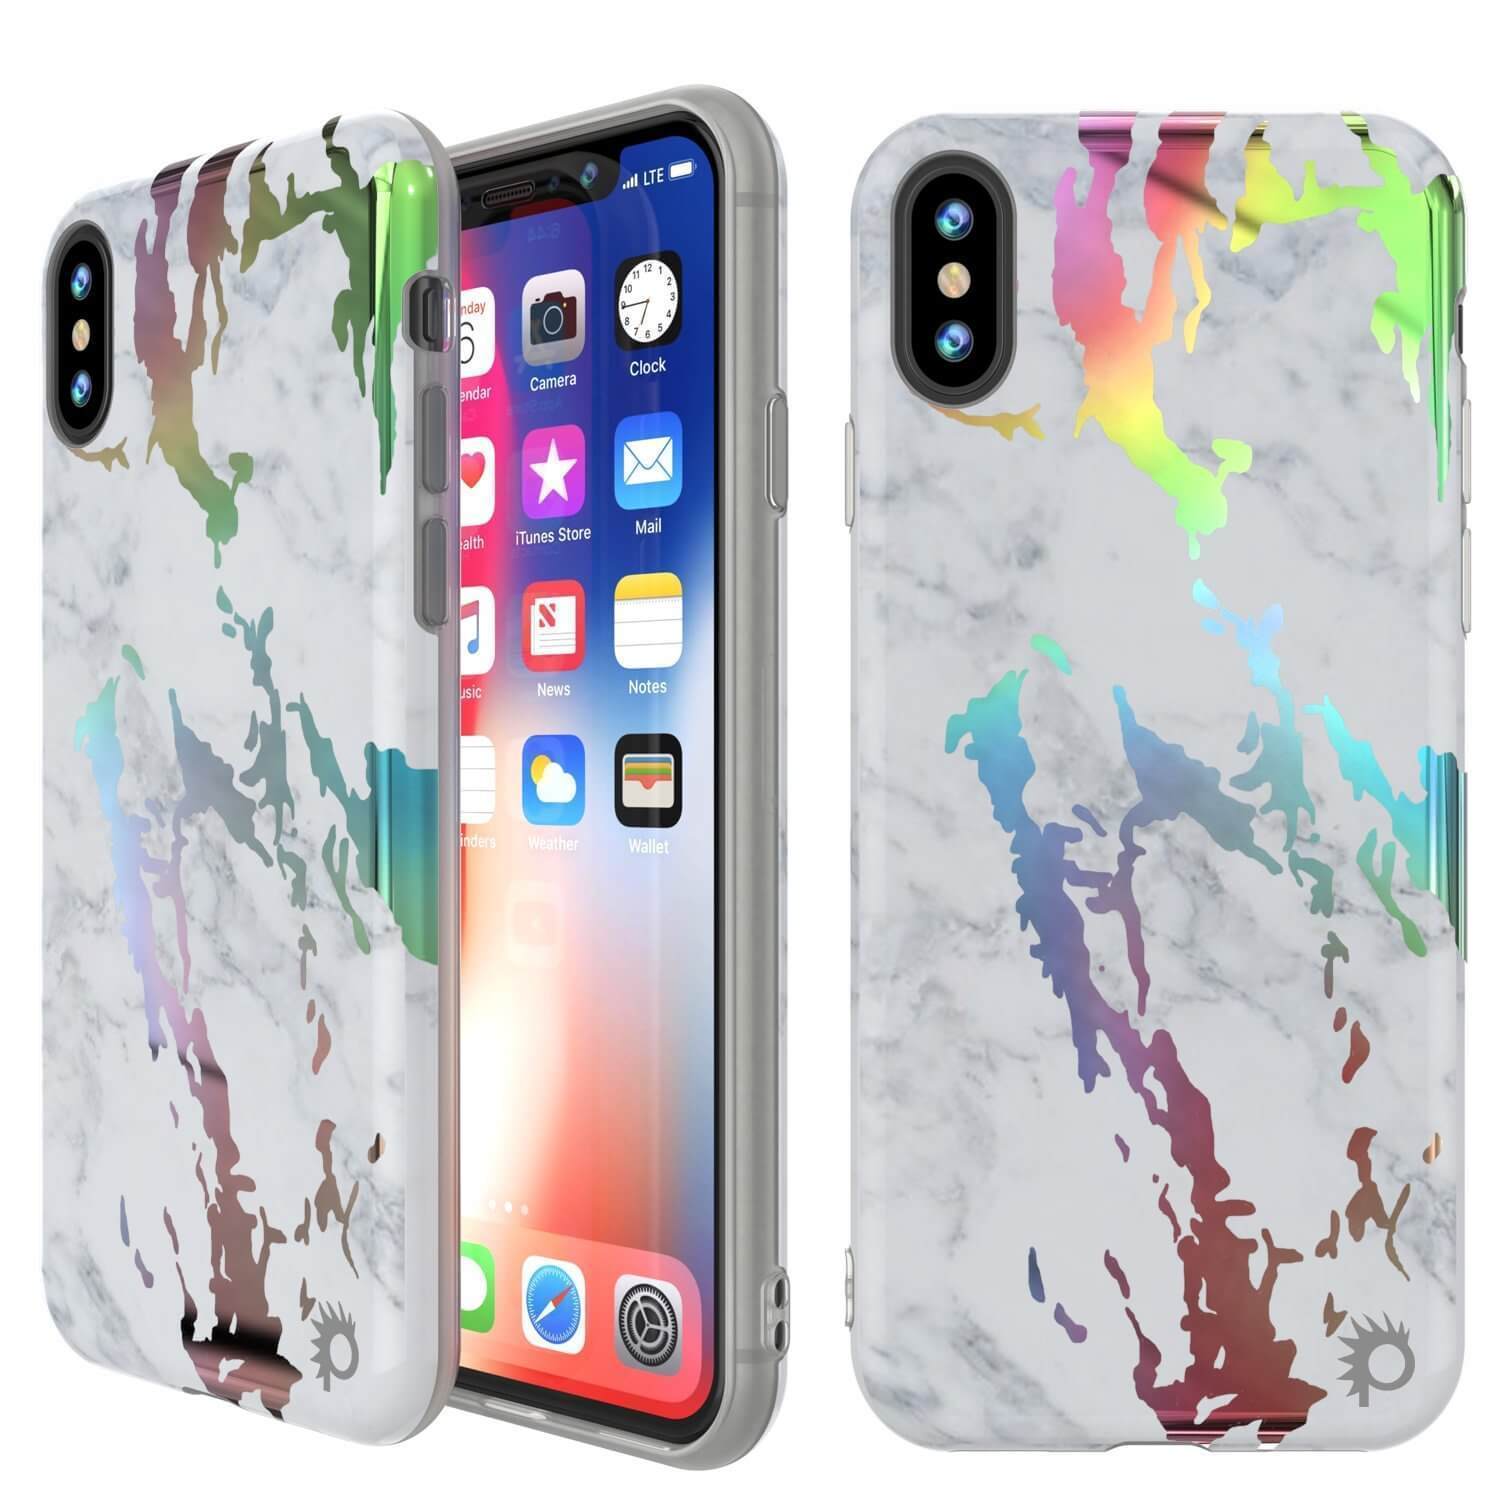 Punkcase iPhone XR Marble Case, Protective Full Body Cover Protector (Blanco Maemo)